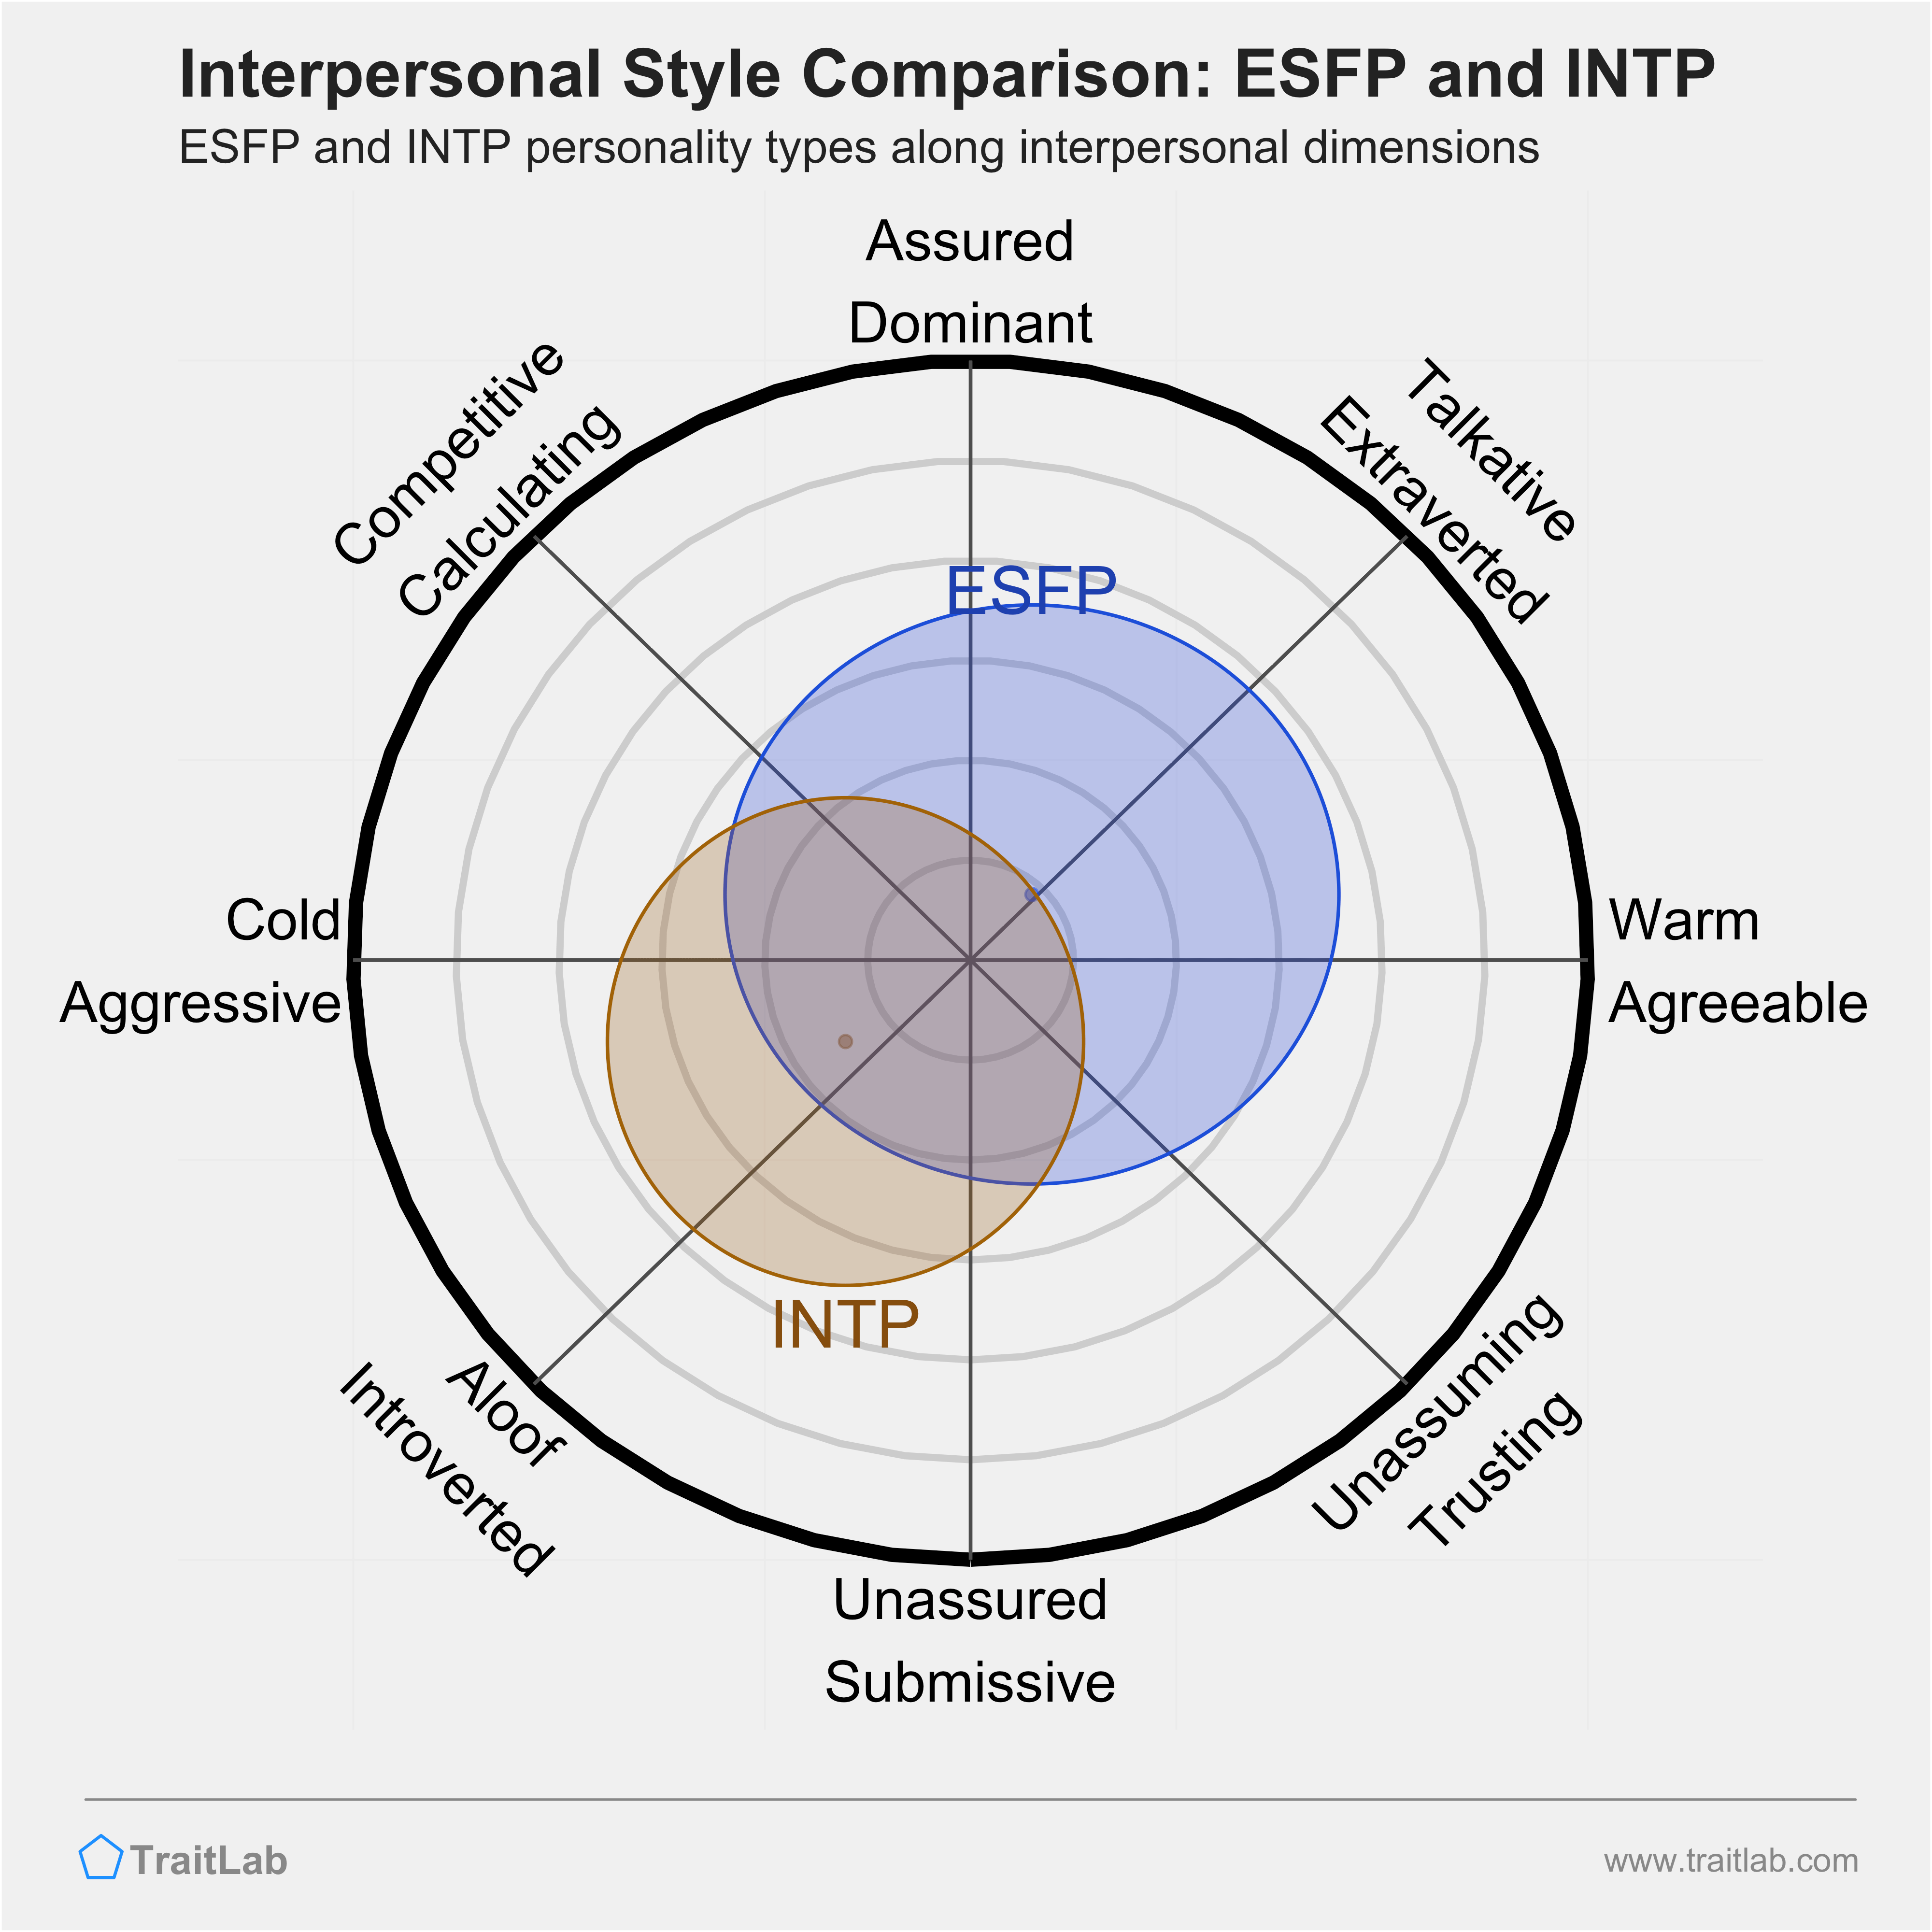 ESFP and INTP comparison across interpersonal dimensions